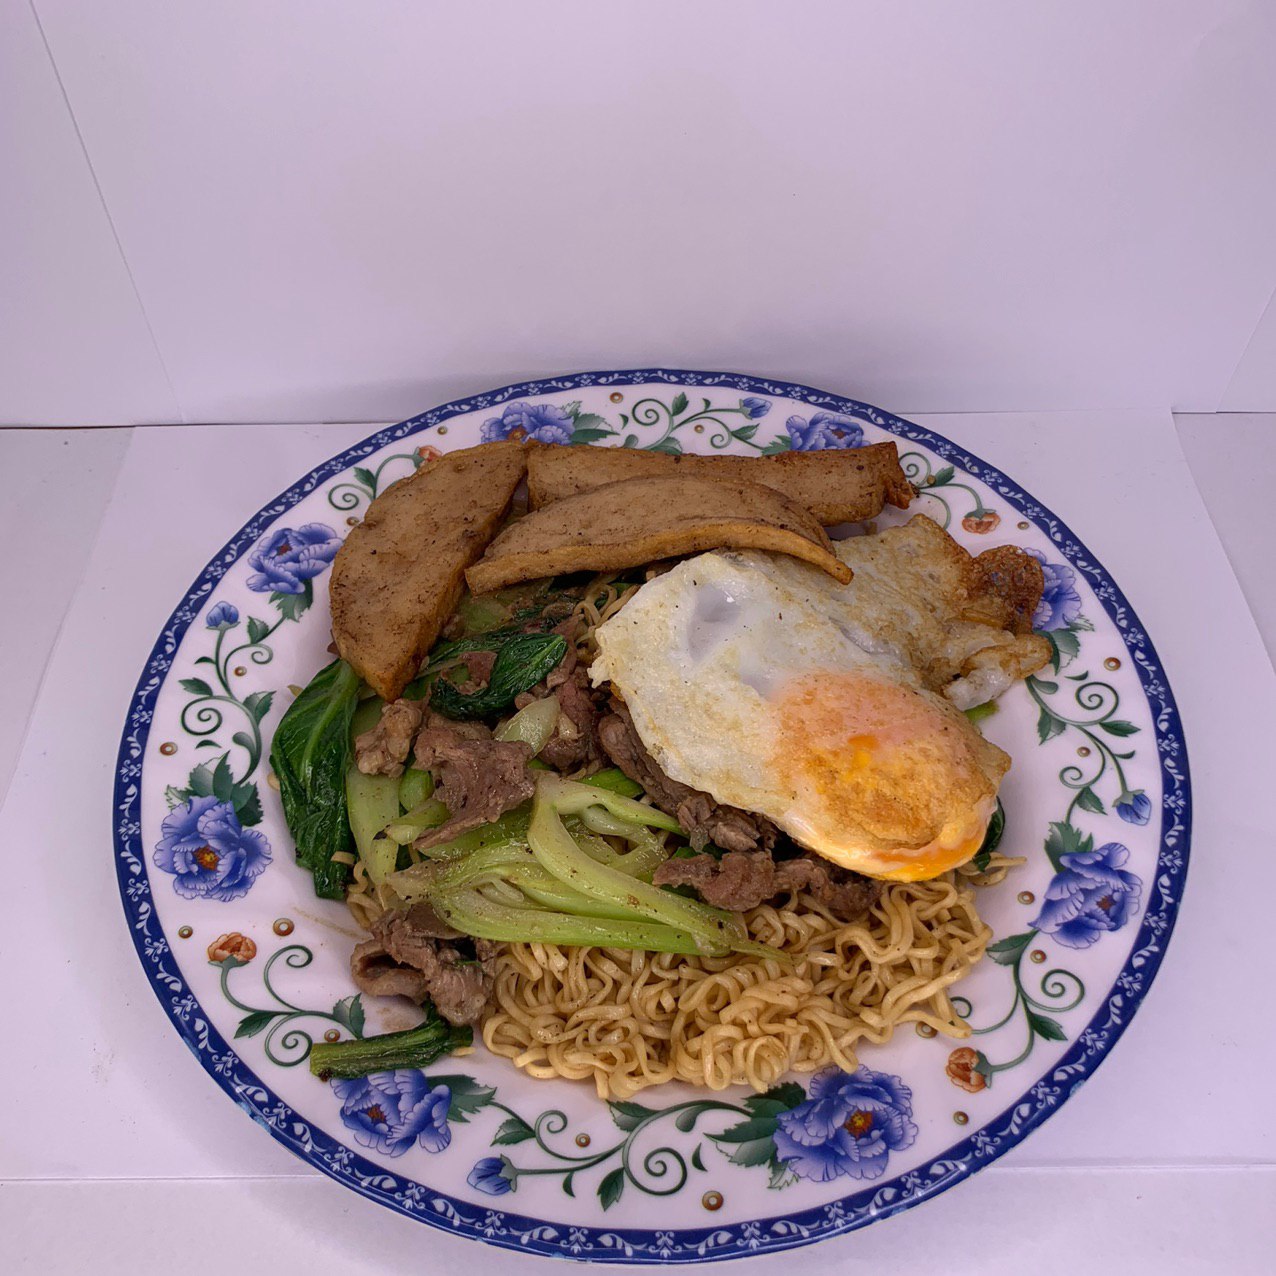 03.Fried Noodle with Patte, Beef and Egg